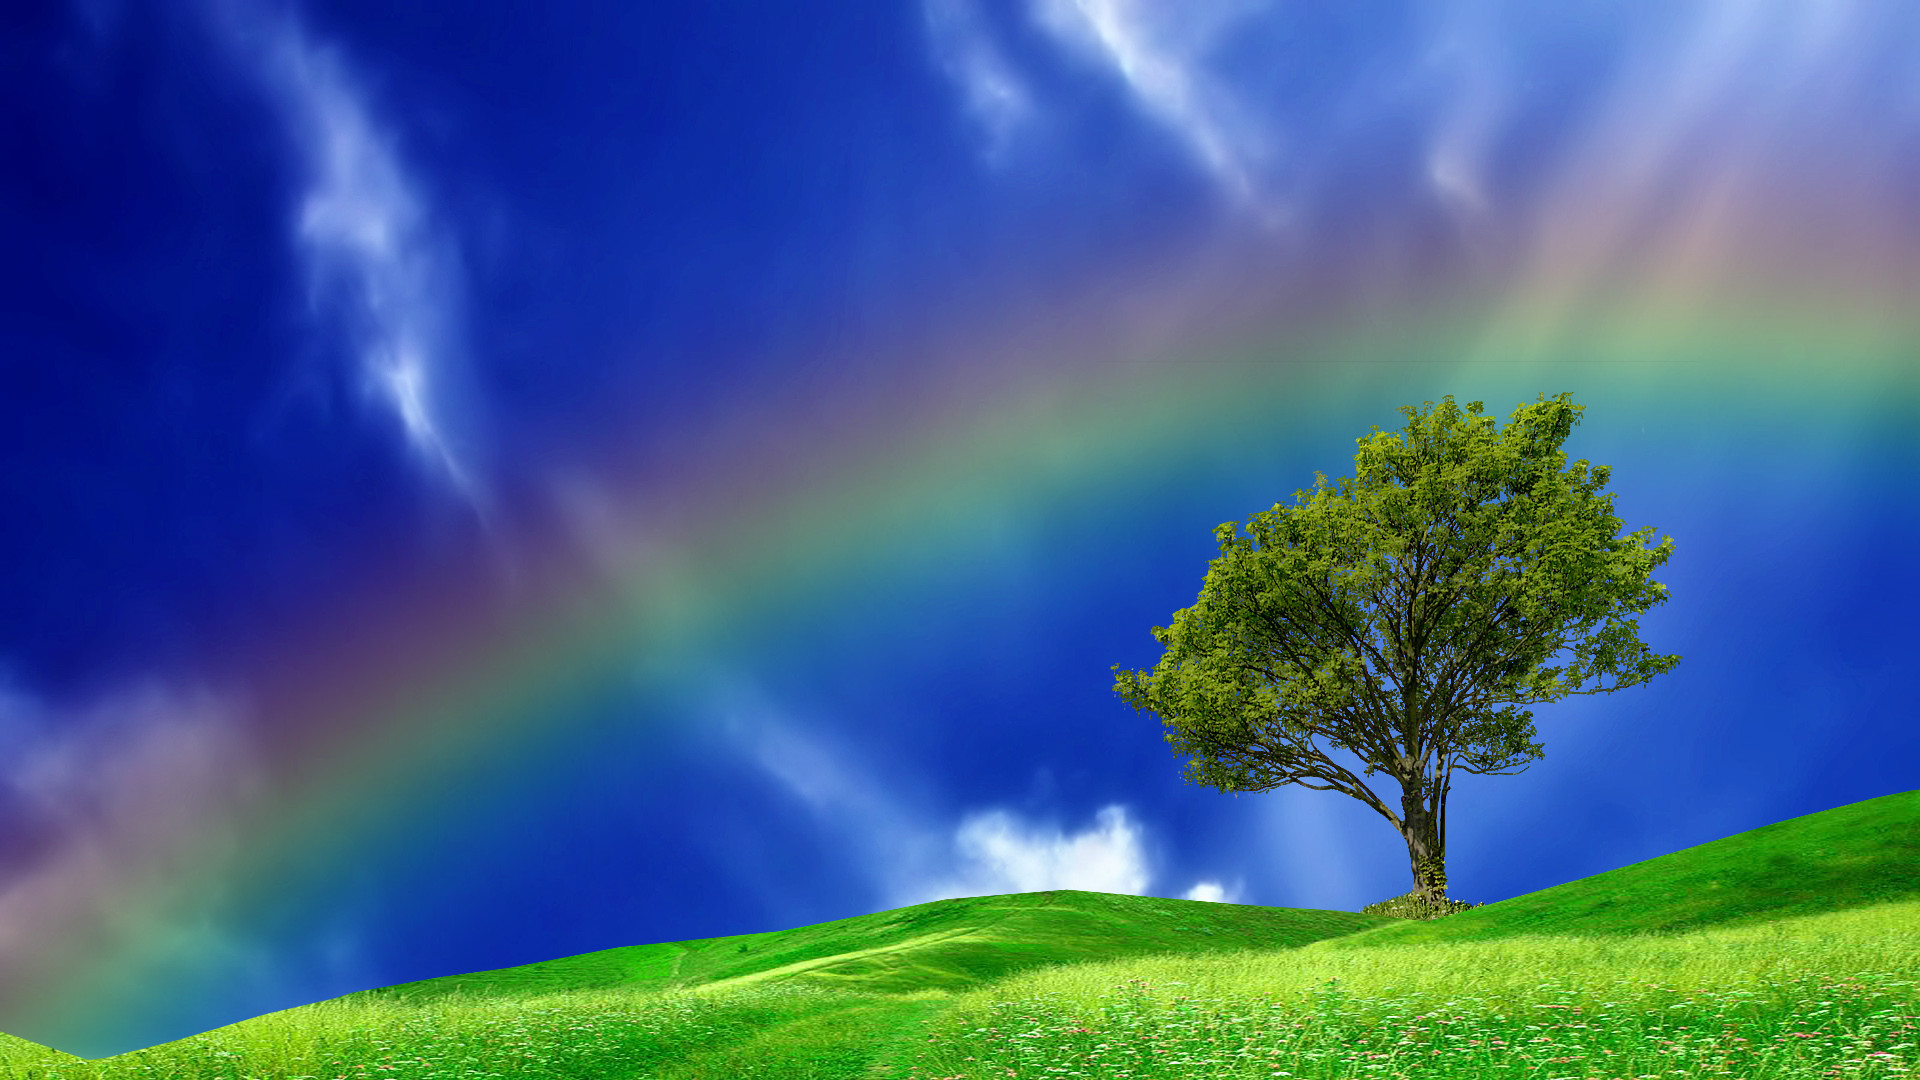 1920x1080 Magnificent Rainbow In A Blue Sky Hd Desktop Background HD wallpapers